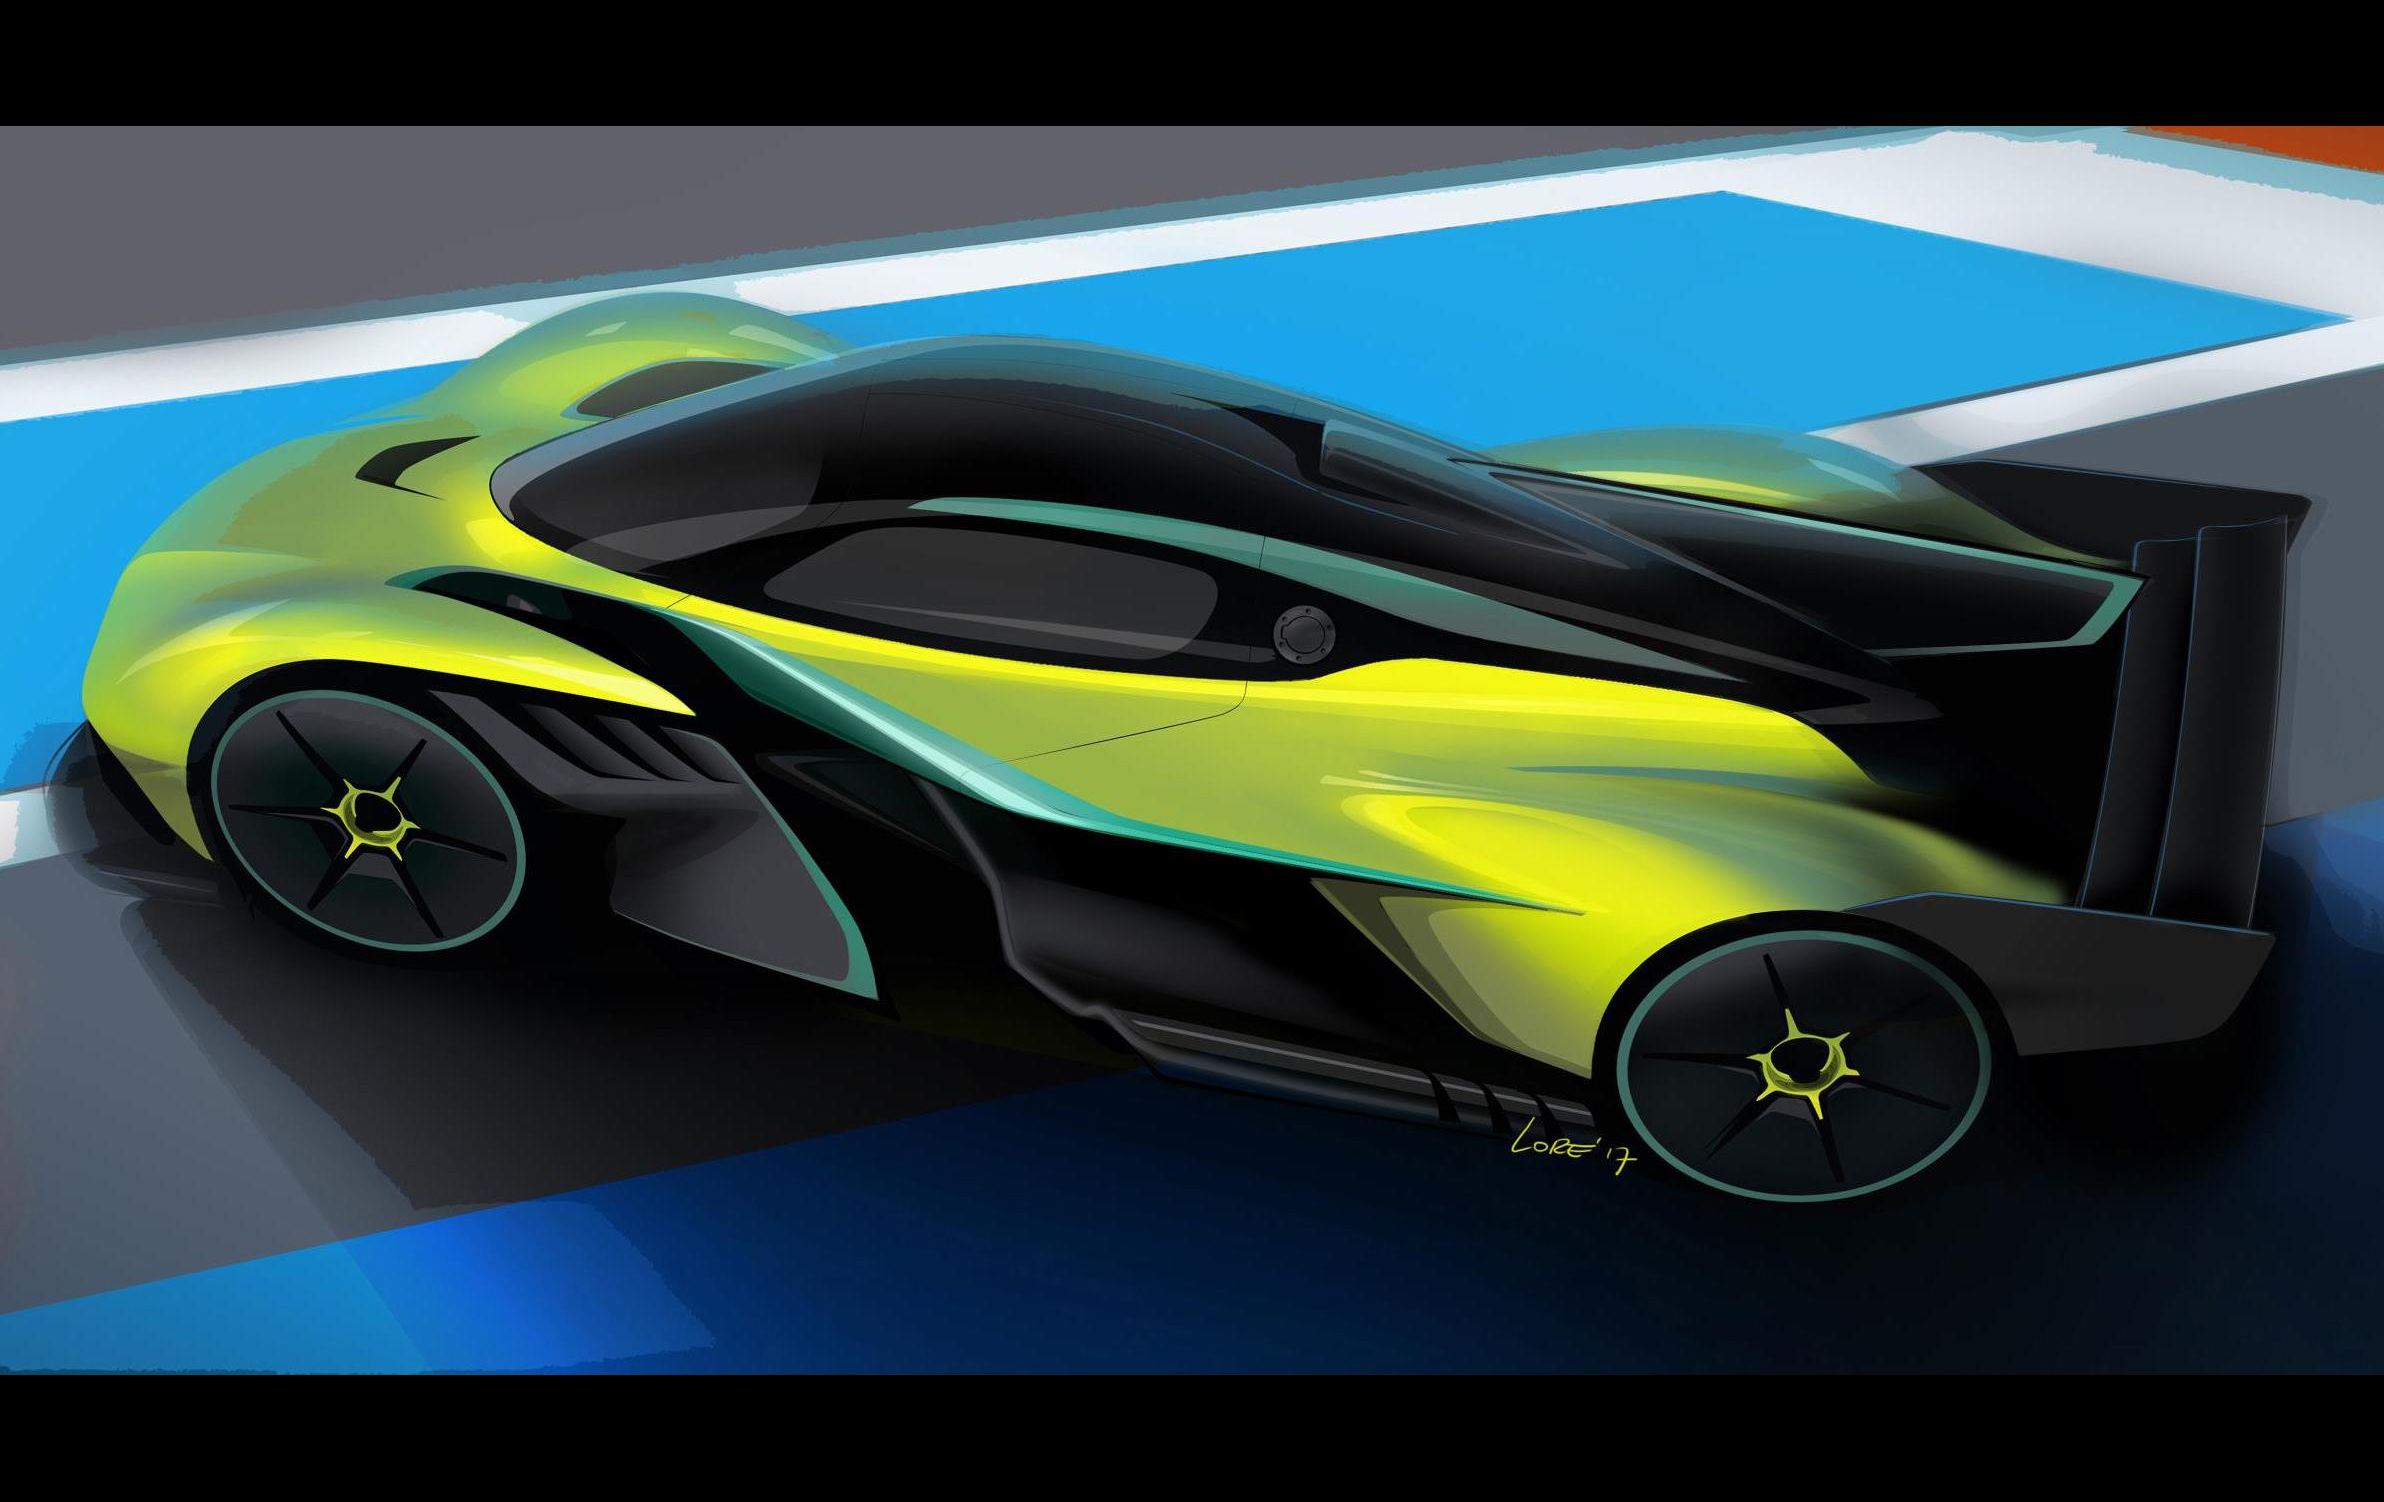 Aston Martin Valkyrie AMR Pro: 25 planned, all sold